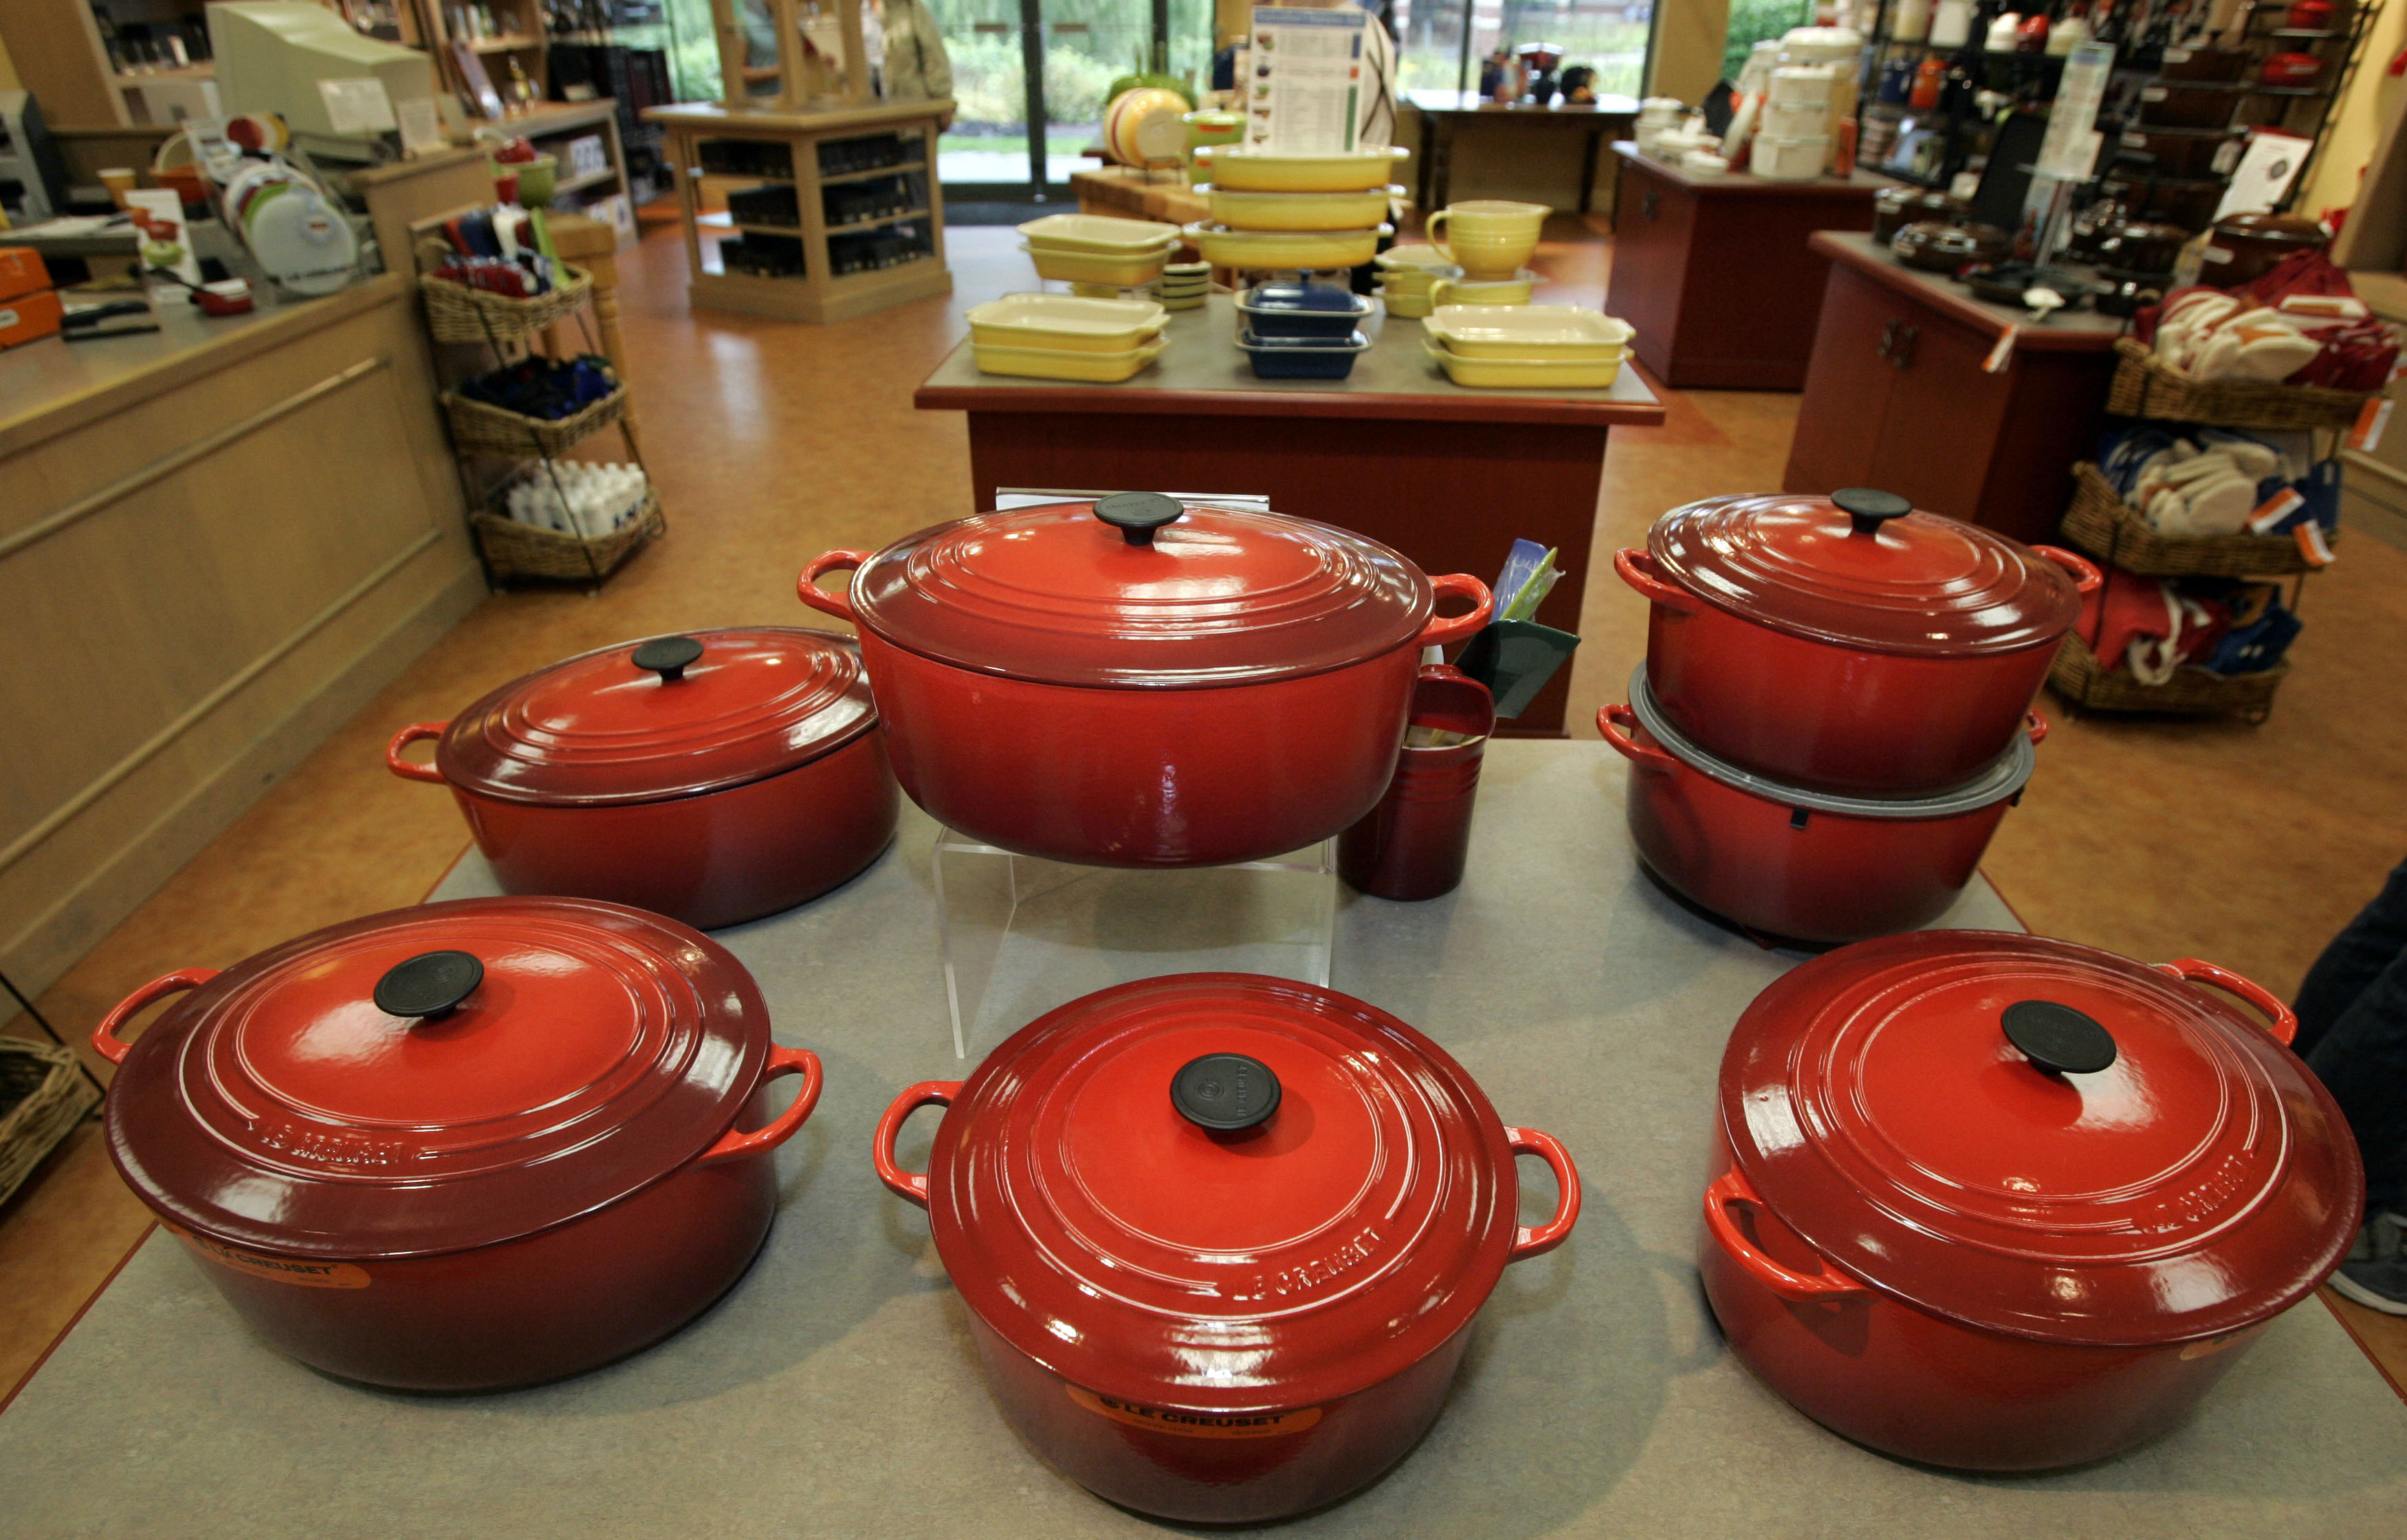 Le Creuset Factory to Table Sale: Get up to 50% off dutch ovens right now 